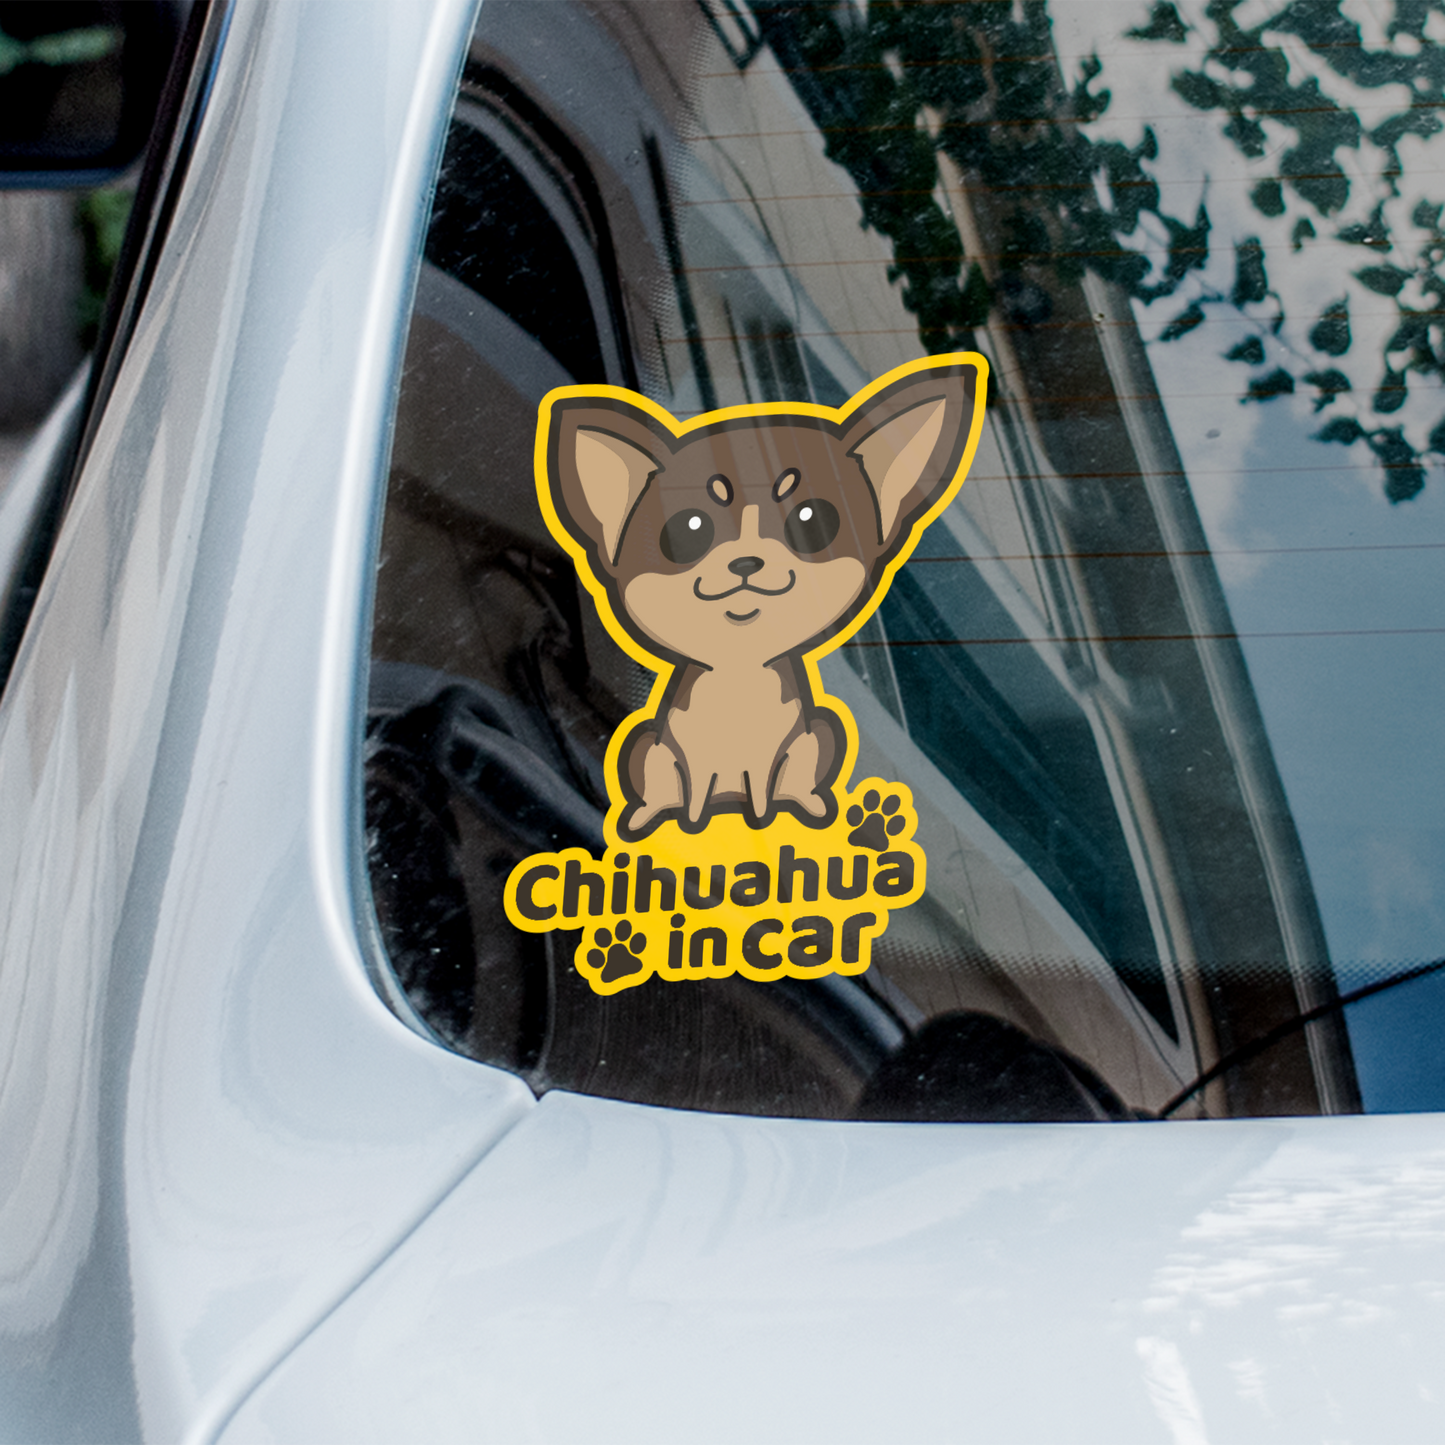 Chihuahua Car Sticker, Chihuahua Cute Dog Vinyl Sticker, Sticks On The Inside Facing Out